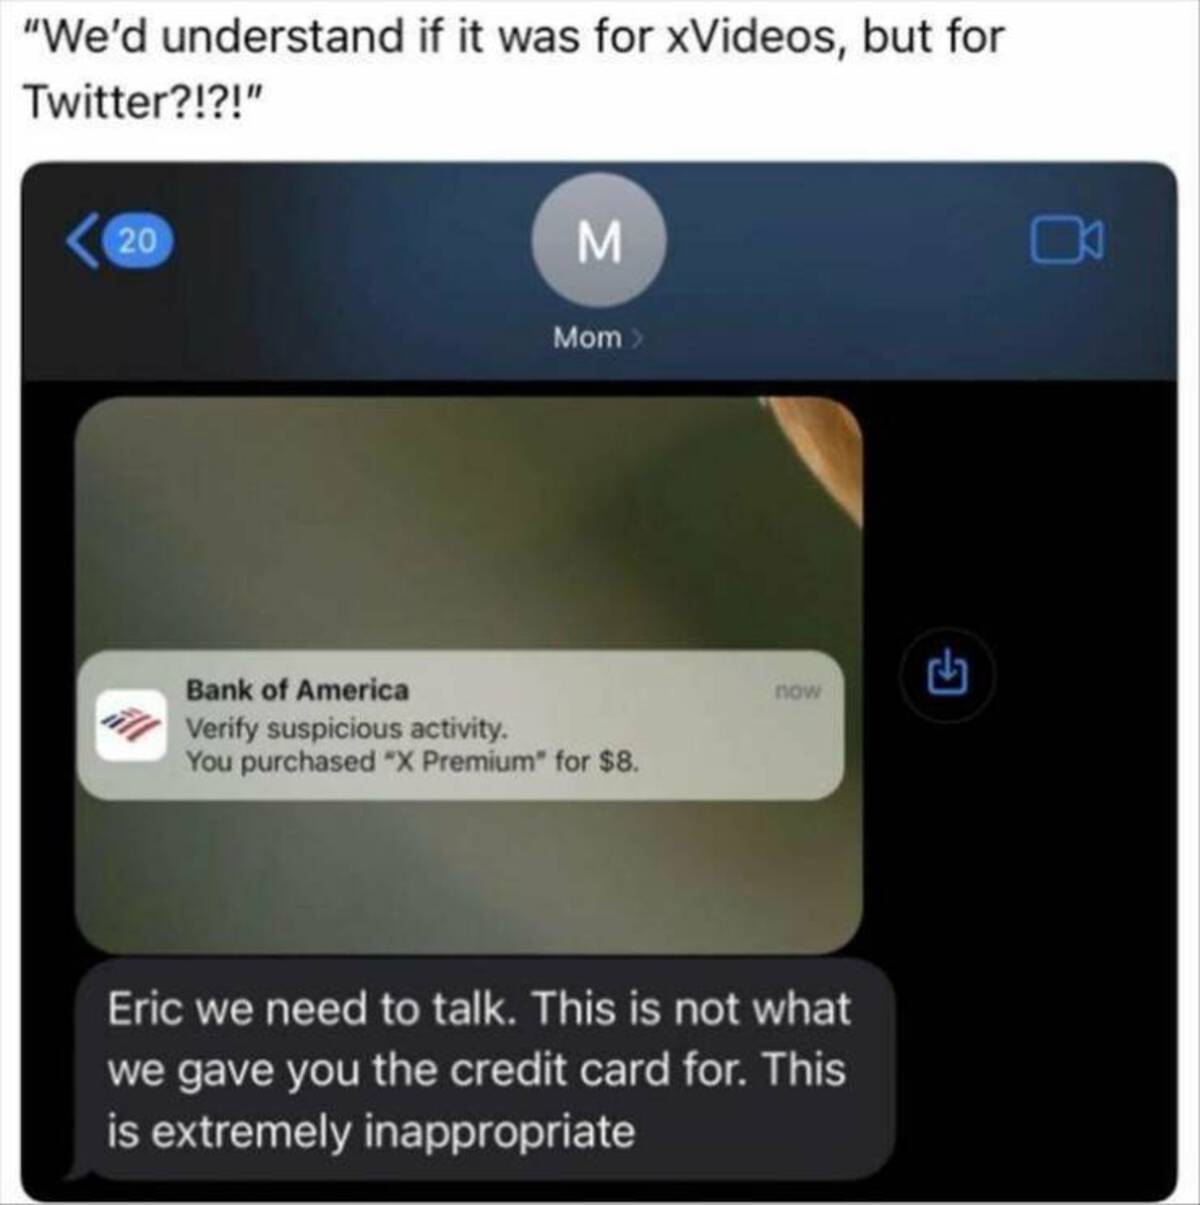 eric we need to talk this is not what we gave you the credit card for - "We'd understand if it was for xVideos, but for Twitter?!?!" 20 M Mom > Bank of America Verify suspicious activity. You purchased "X Premium" for $8. now Eric we need to talk. This is